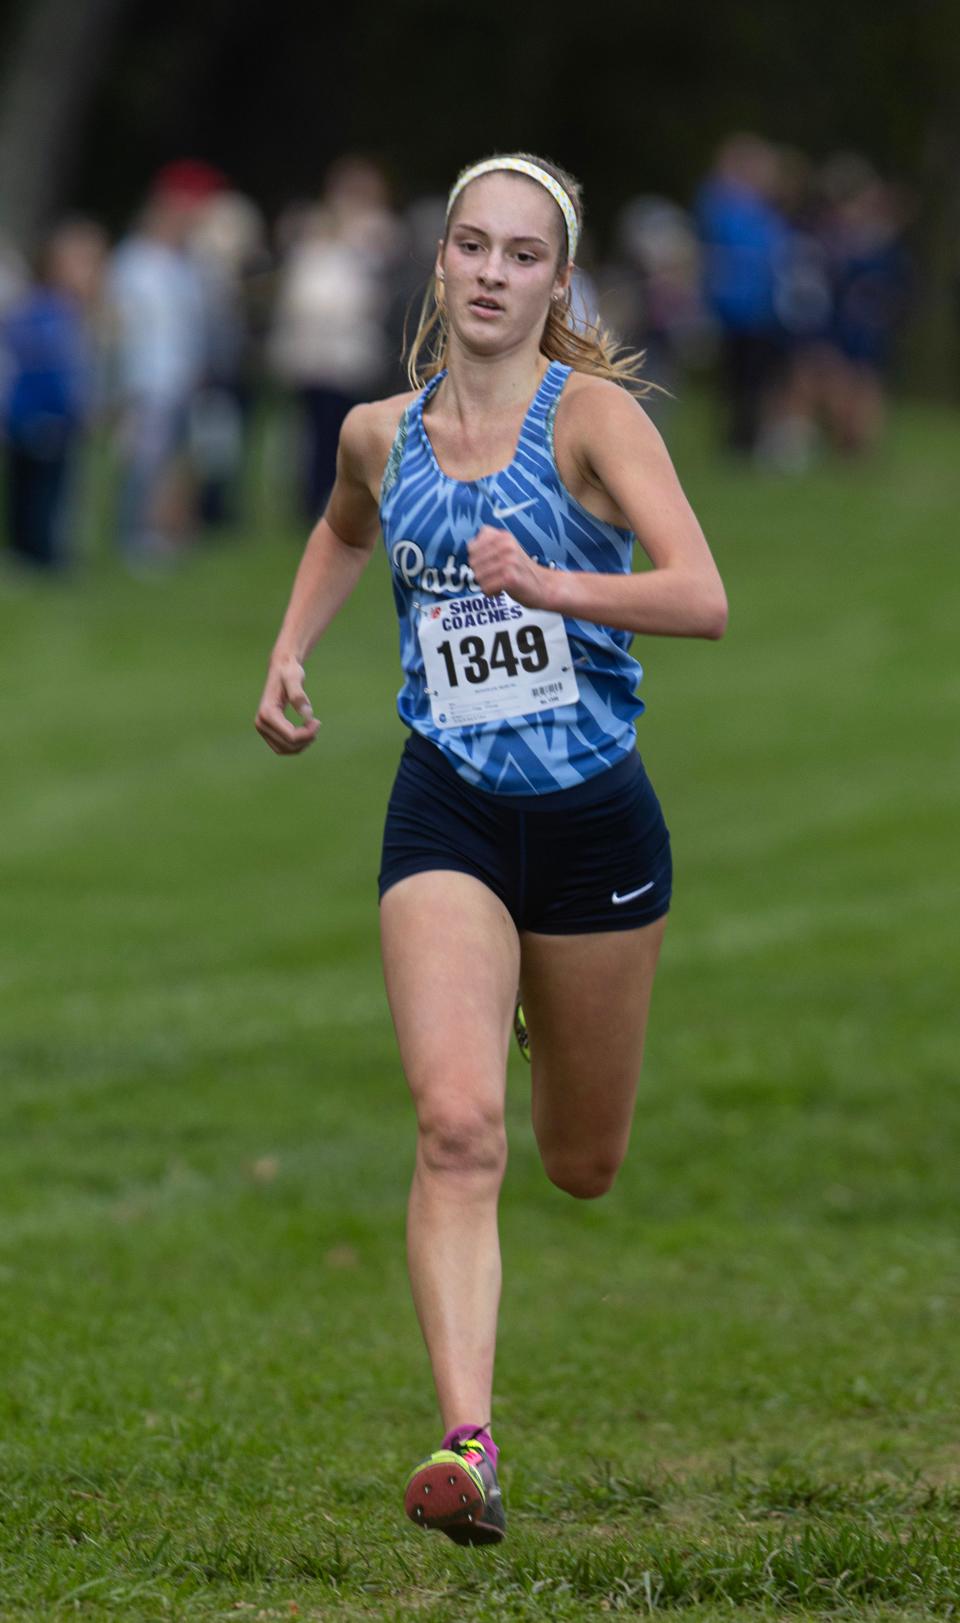 Emma Zawatski of Freehold Township took first in the girls varisty race at the Monmouth County Cross Country Championships at Holmdel Park in Holmdel, NJ on October 10, 2023.